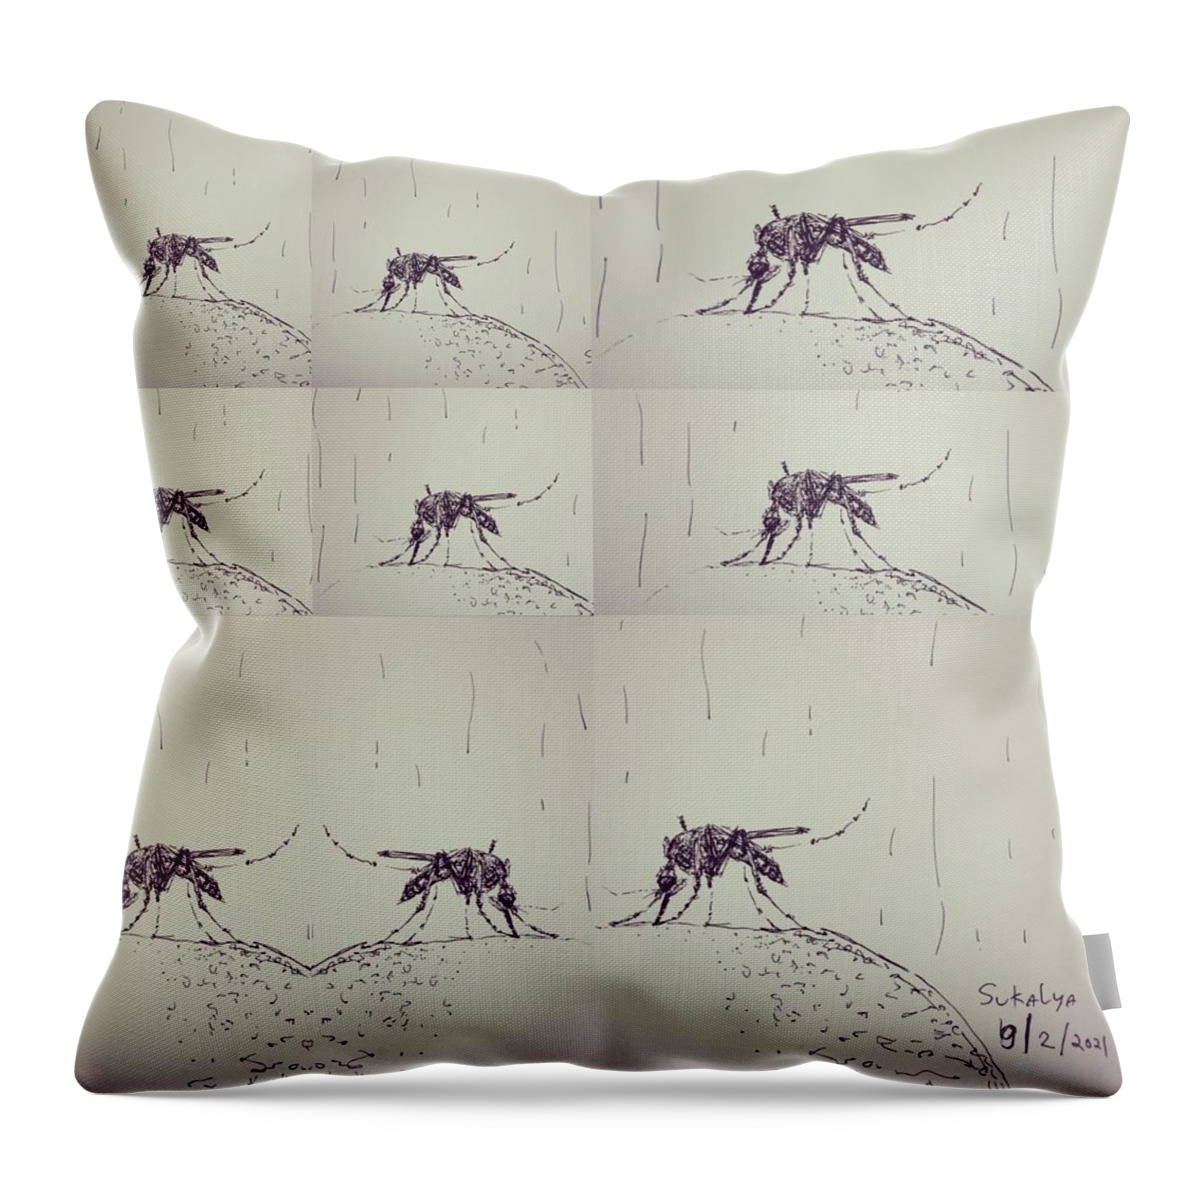 Mosquito​es Throw Pillow featuring the drawing Mosquitoes by Sukalya Chearanantana